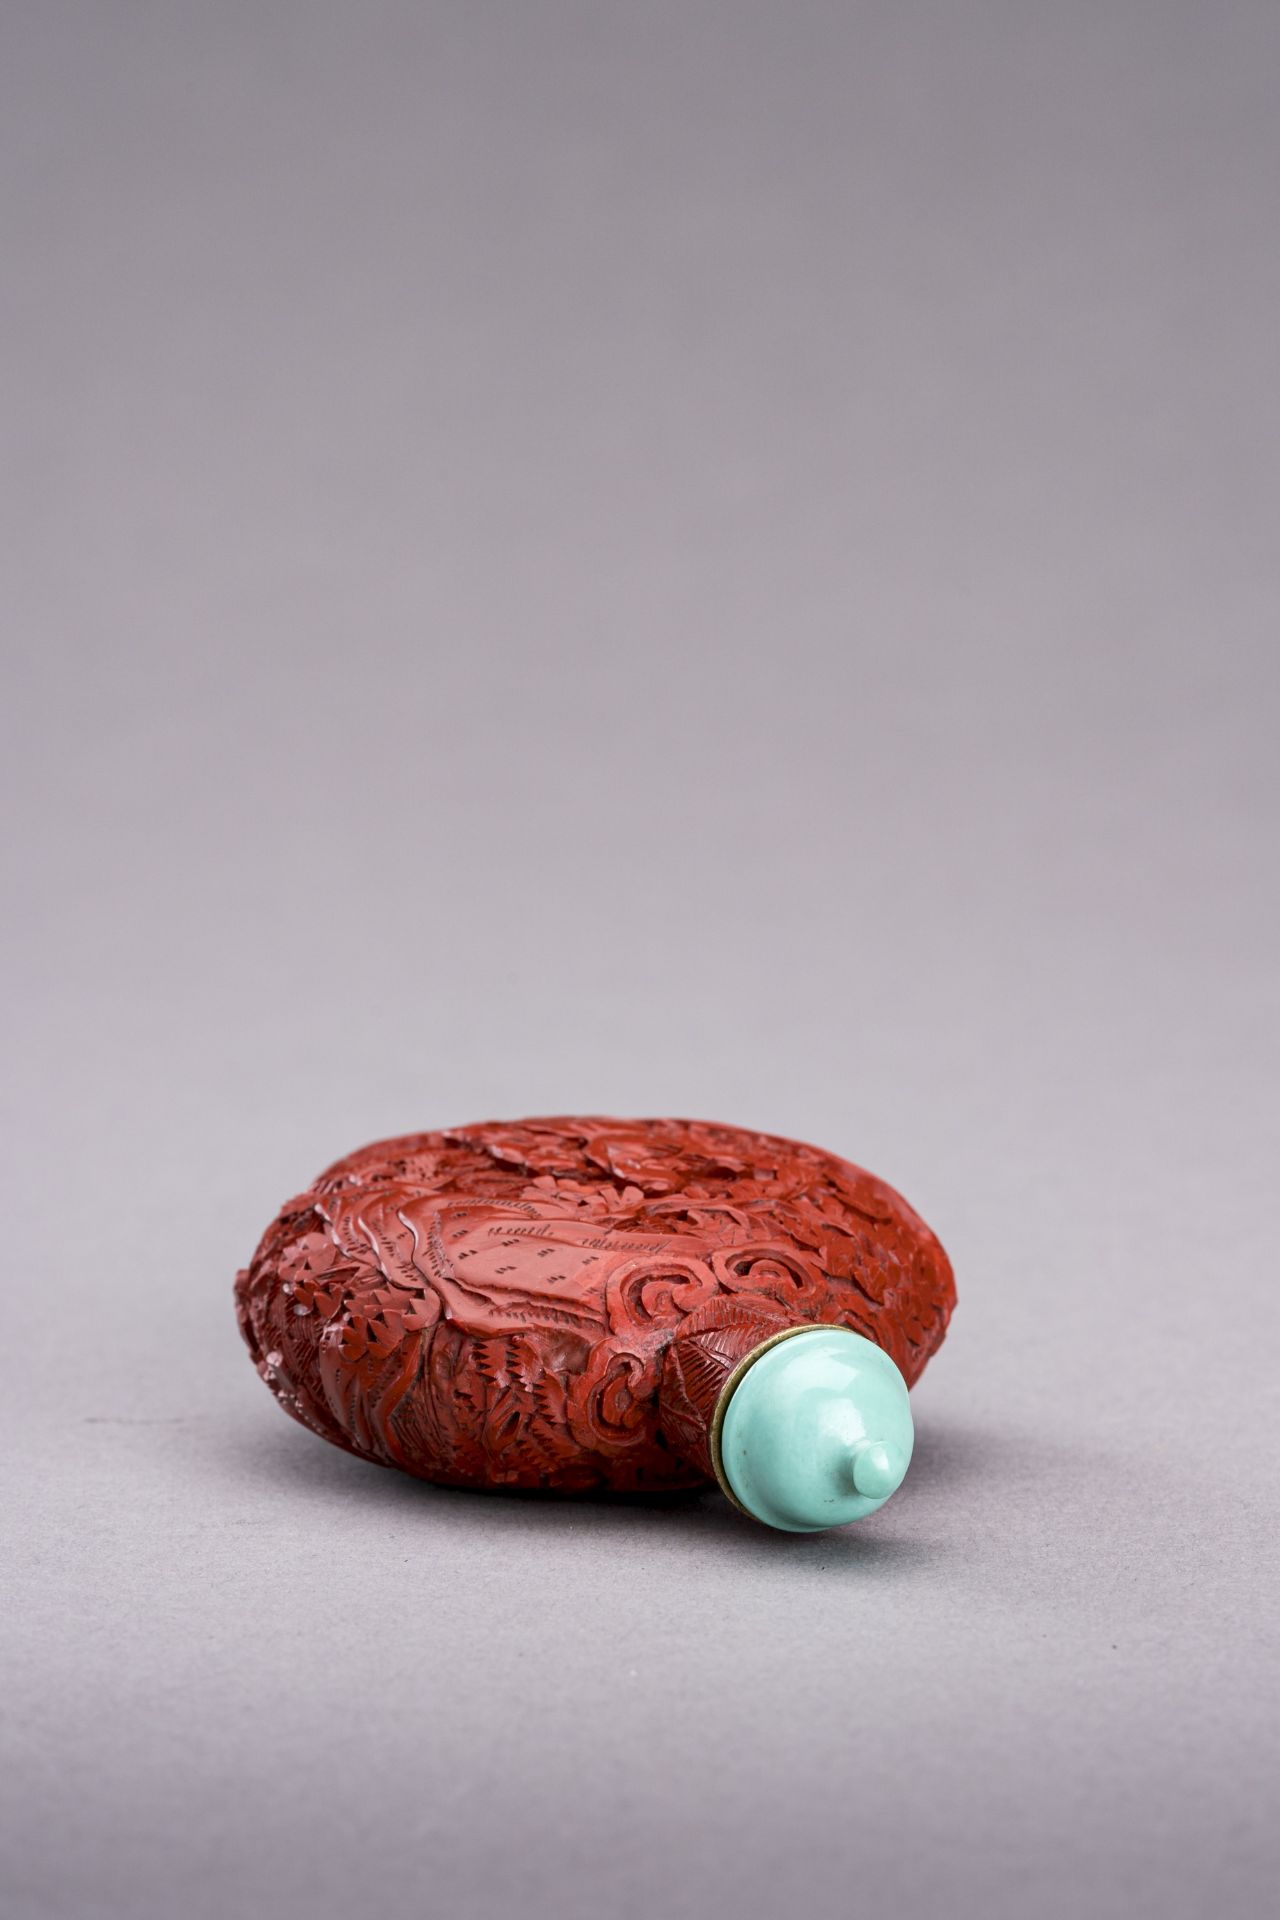 A CINNABAR LACQUER SNUFF BOTTLE, QING DYNASTY - Image 5 of 6